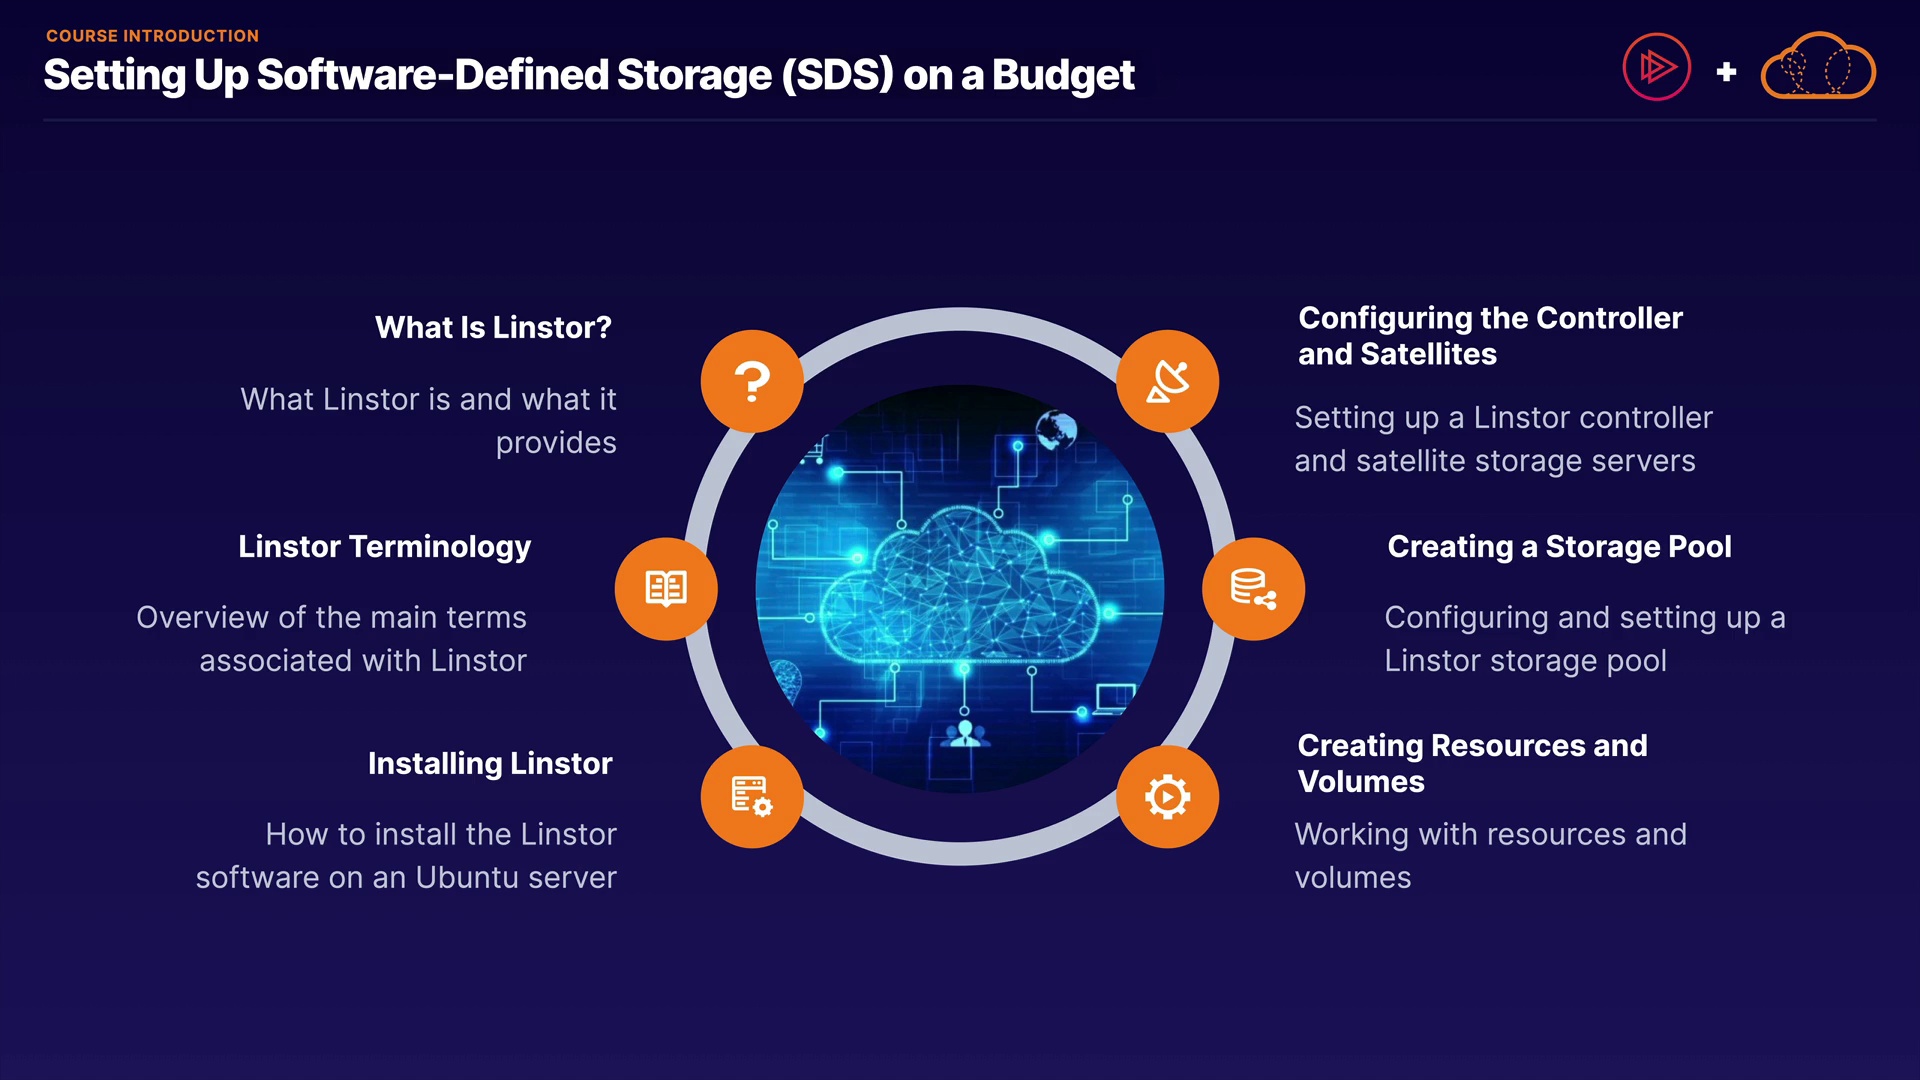 Setting Up Software-Defined Storage (SDS) on a Budget